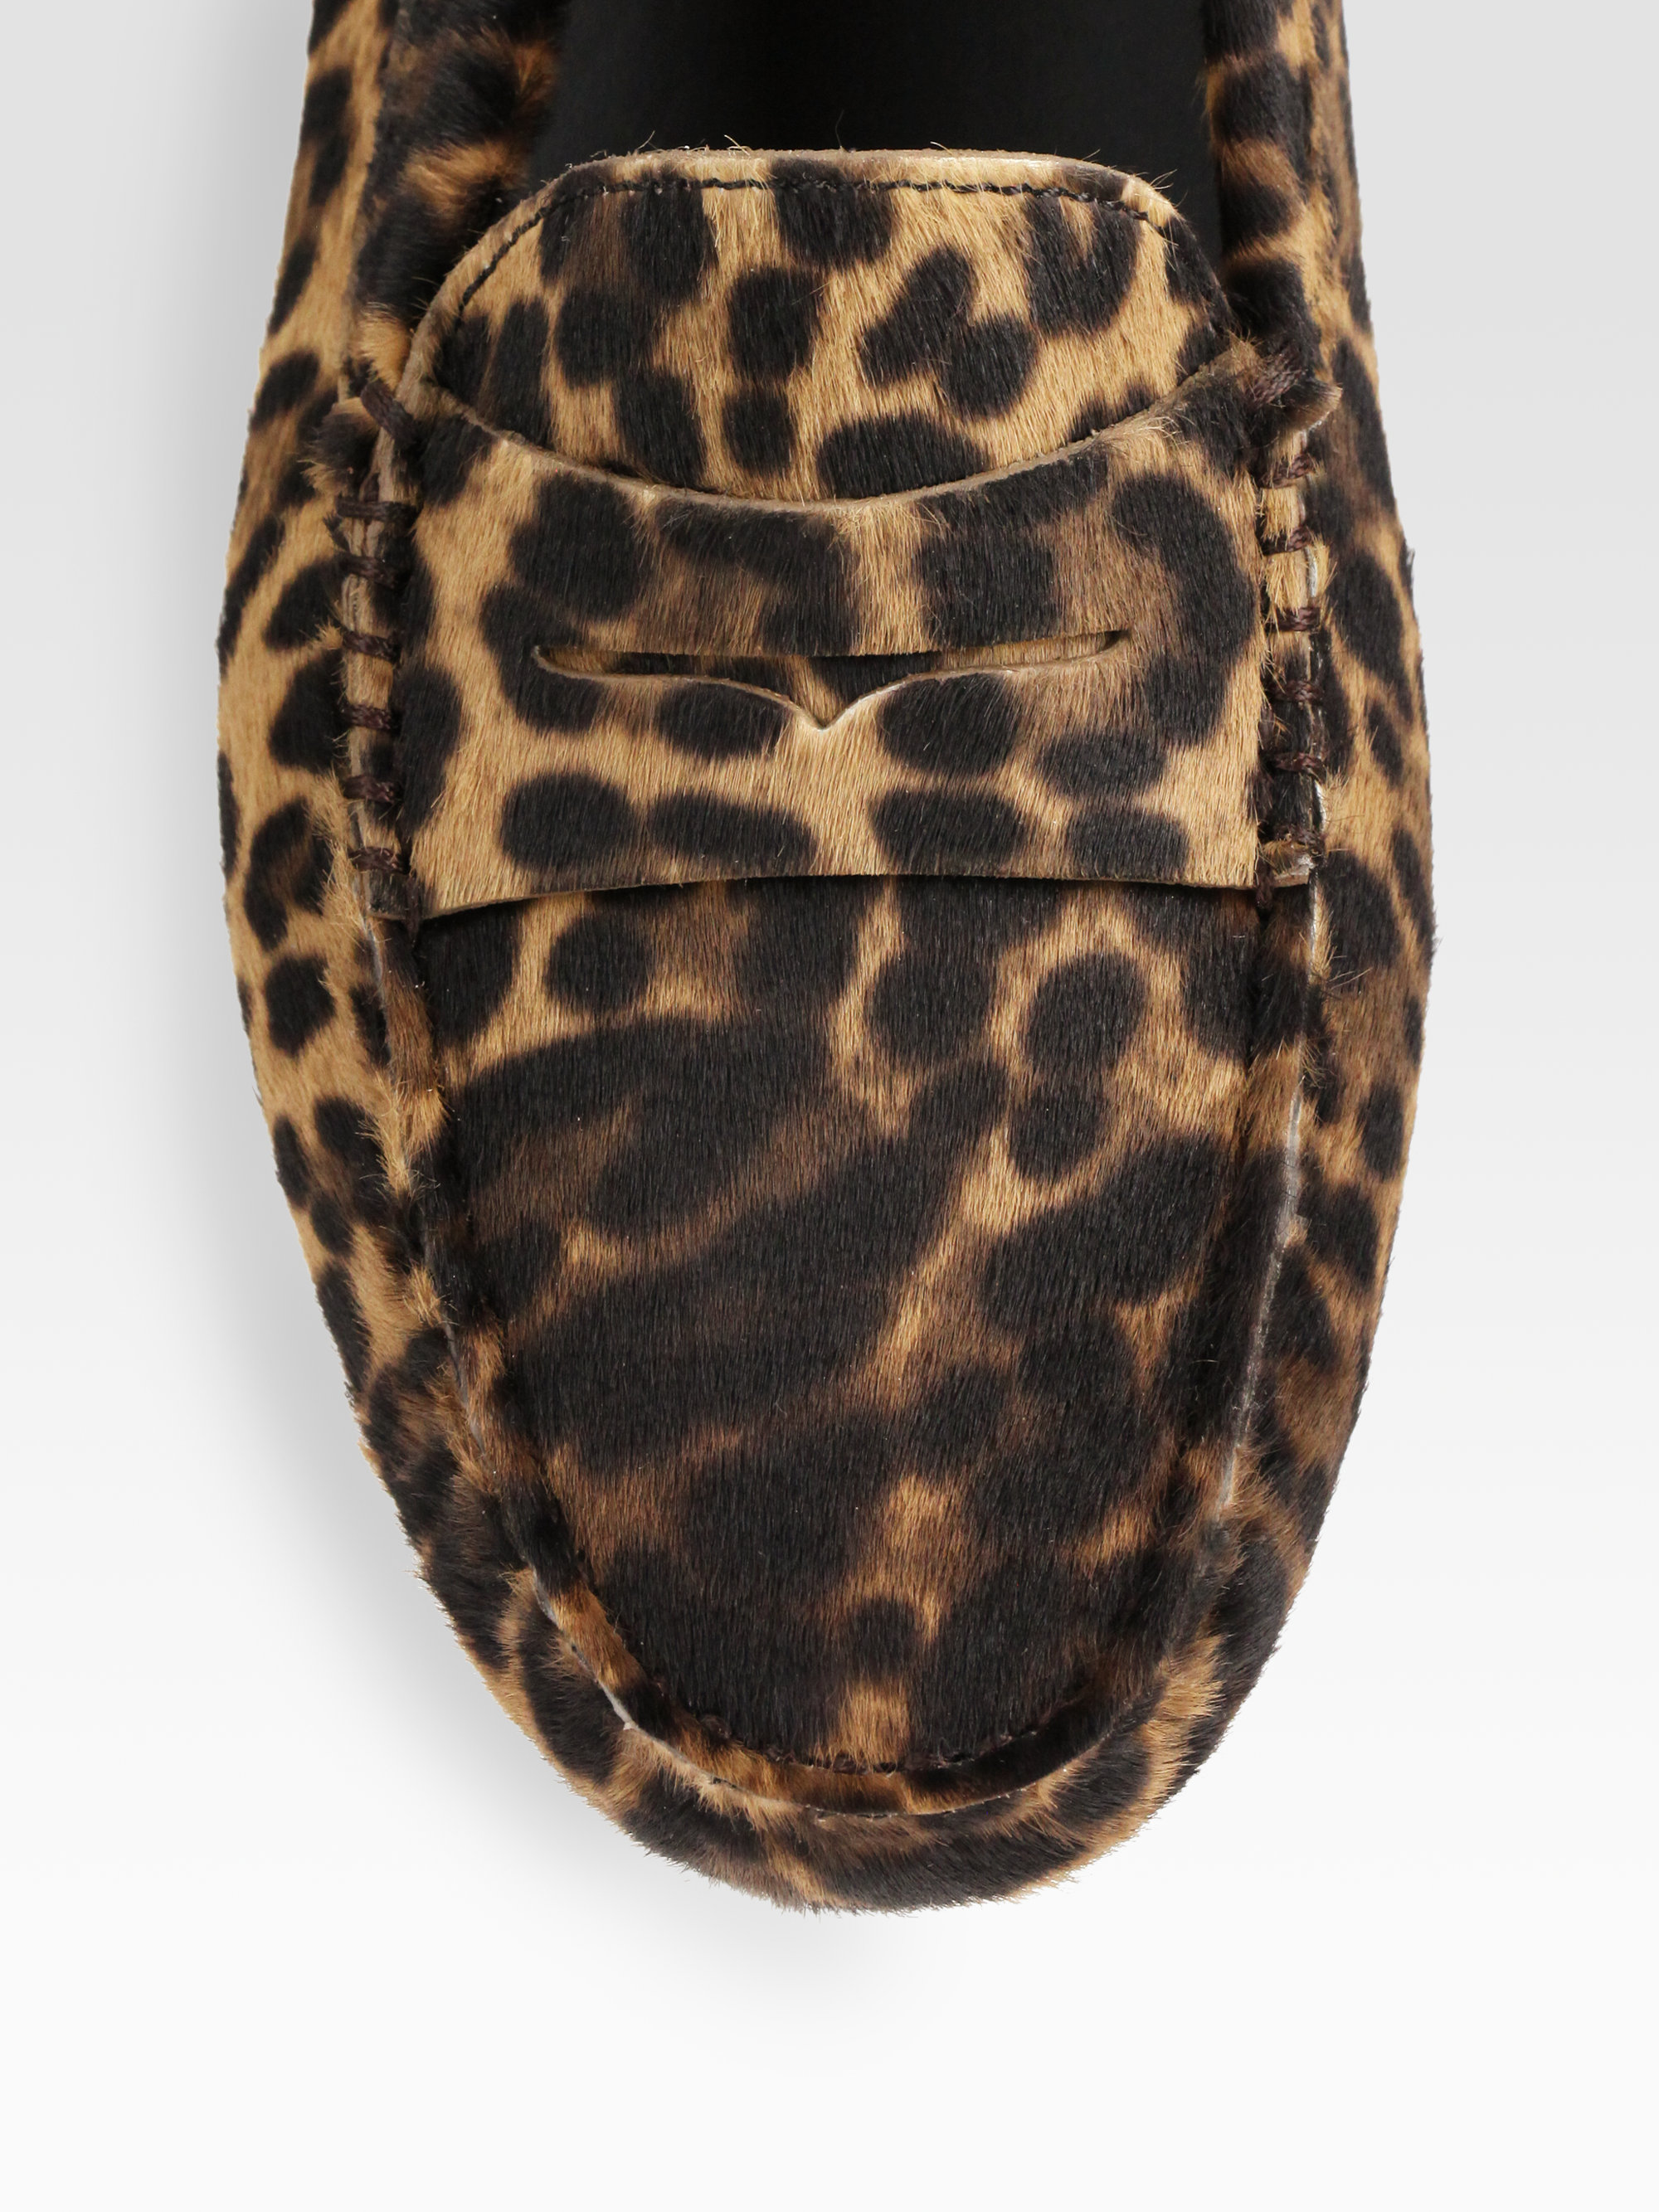 tod's leopard print loafers